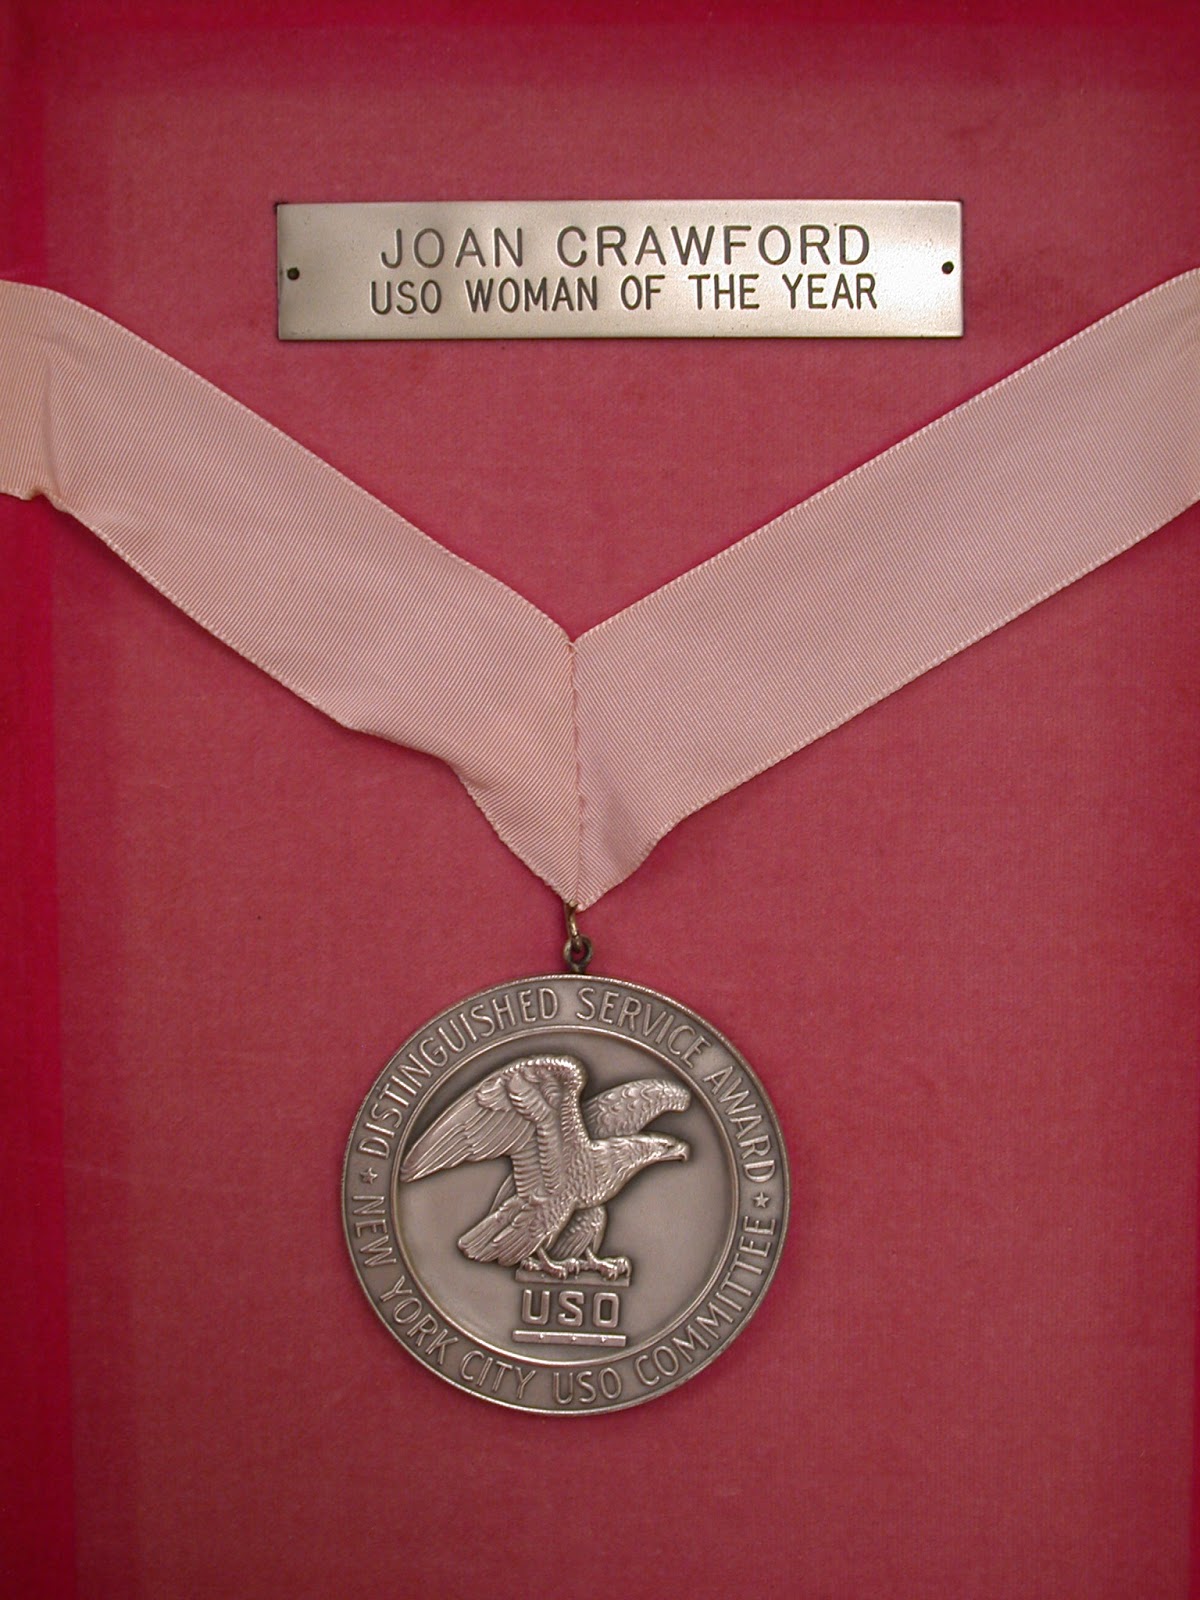 Joan Crawford: USO Woman of the Year medal